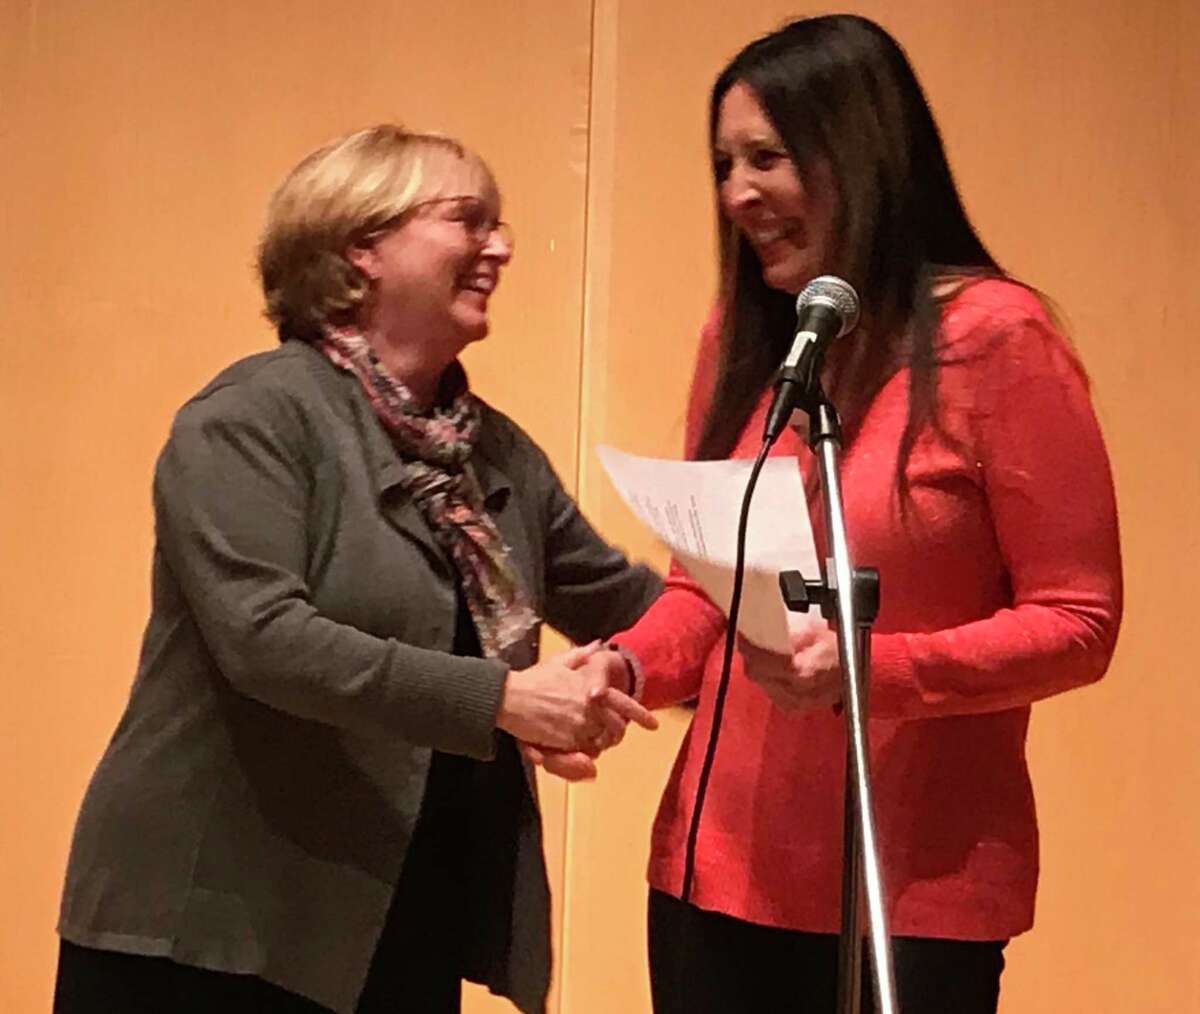 Town Clerk Lori Kabak, right, congratulates First Selectwoman Lynne Vanderslice at Wilton's swearing-in ceremony on Nov. 21.